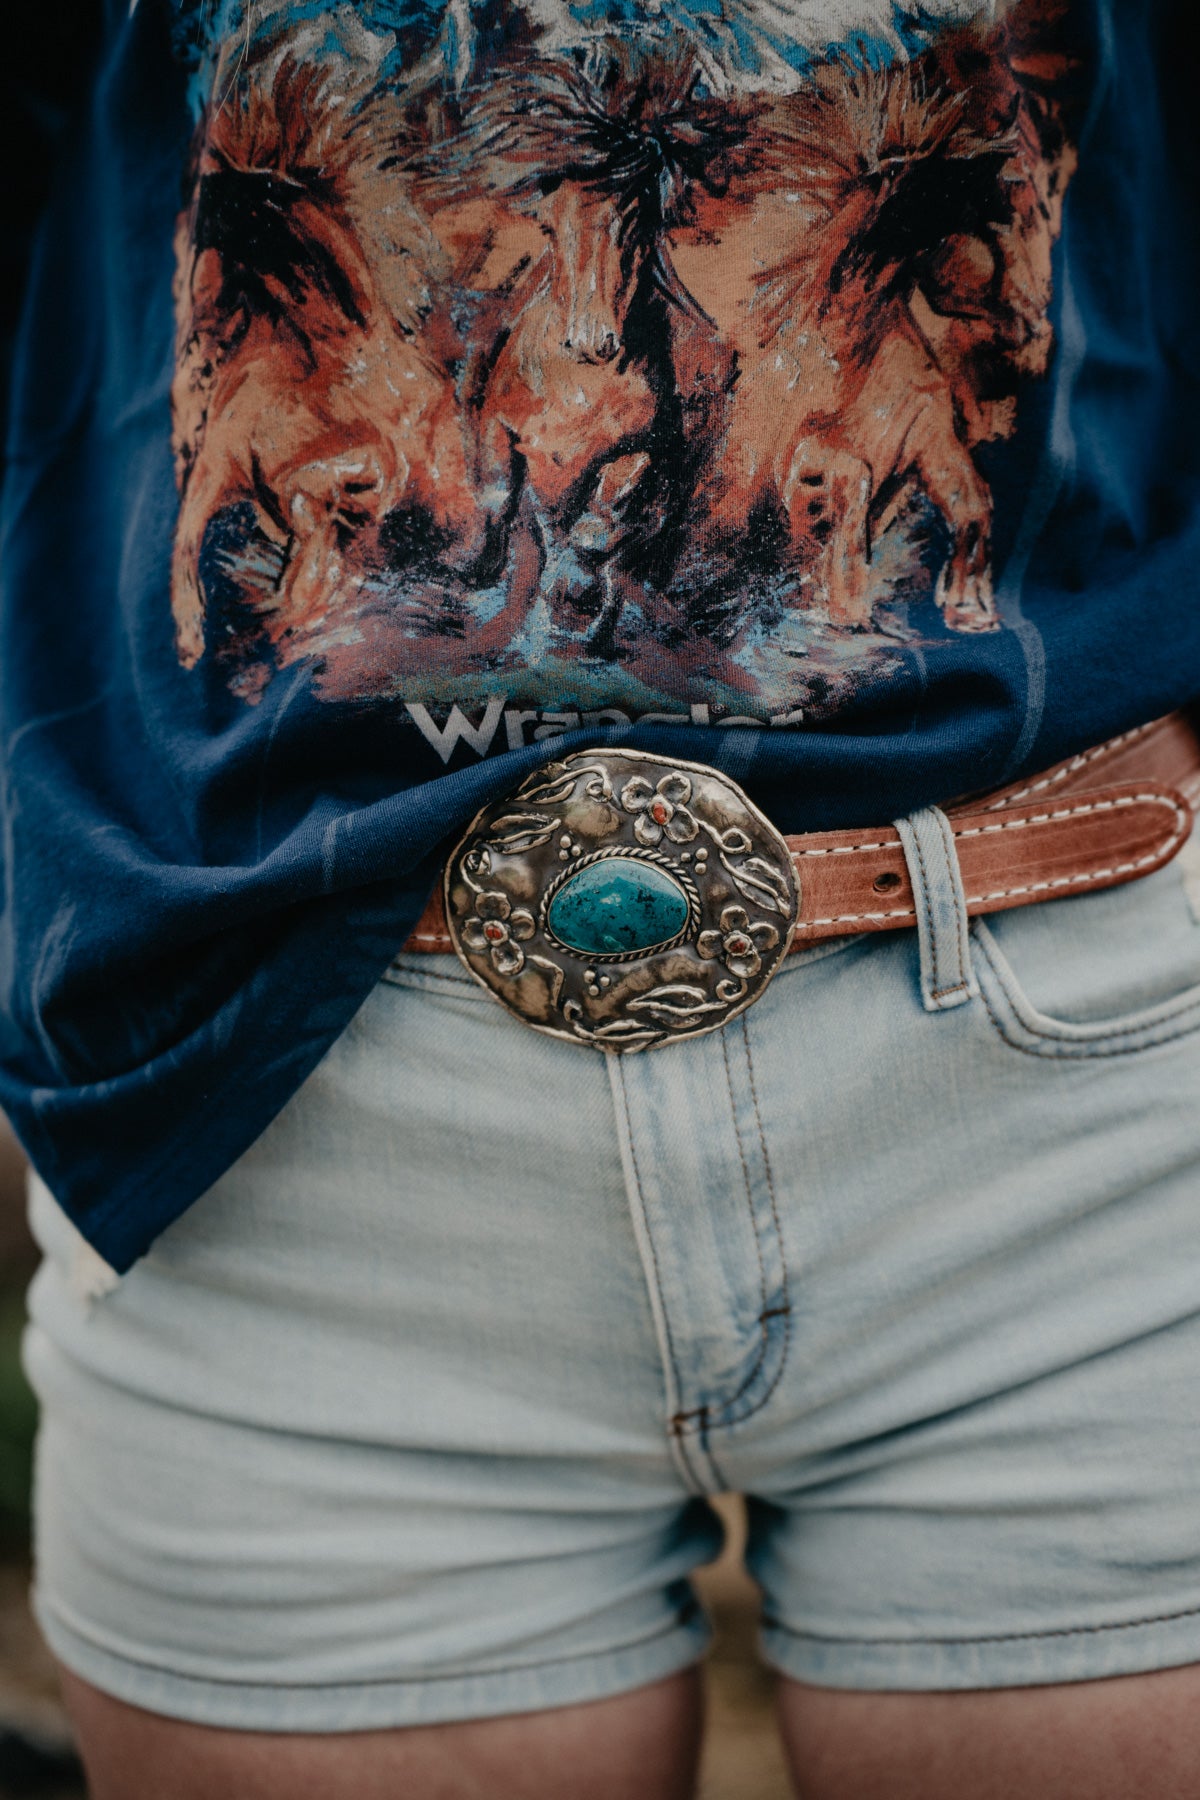 Floral Oval German Silver Buckle with Turquoise Stone by Paige Wallace